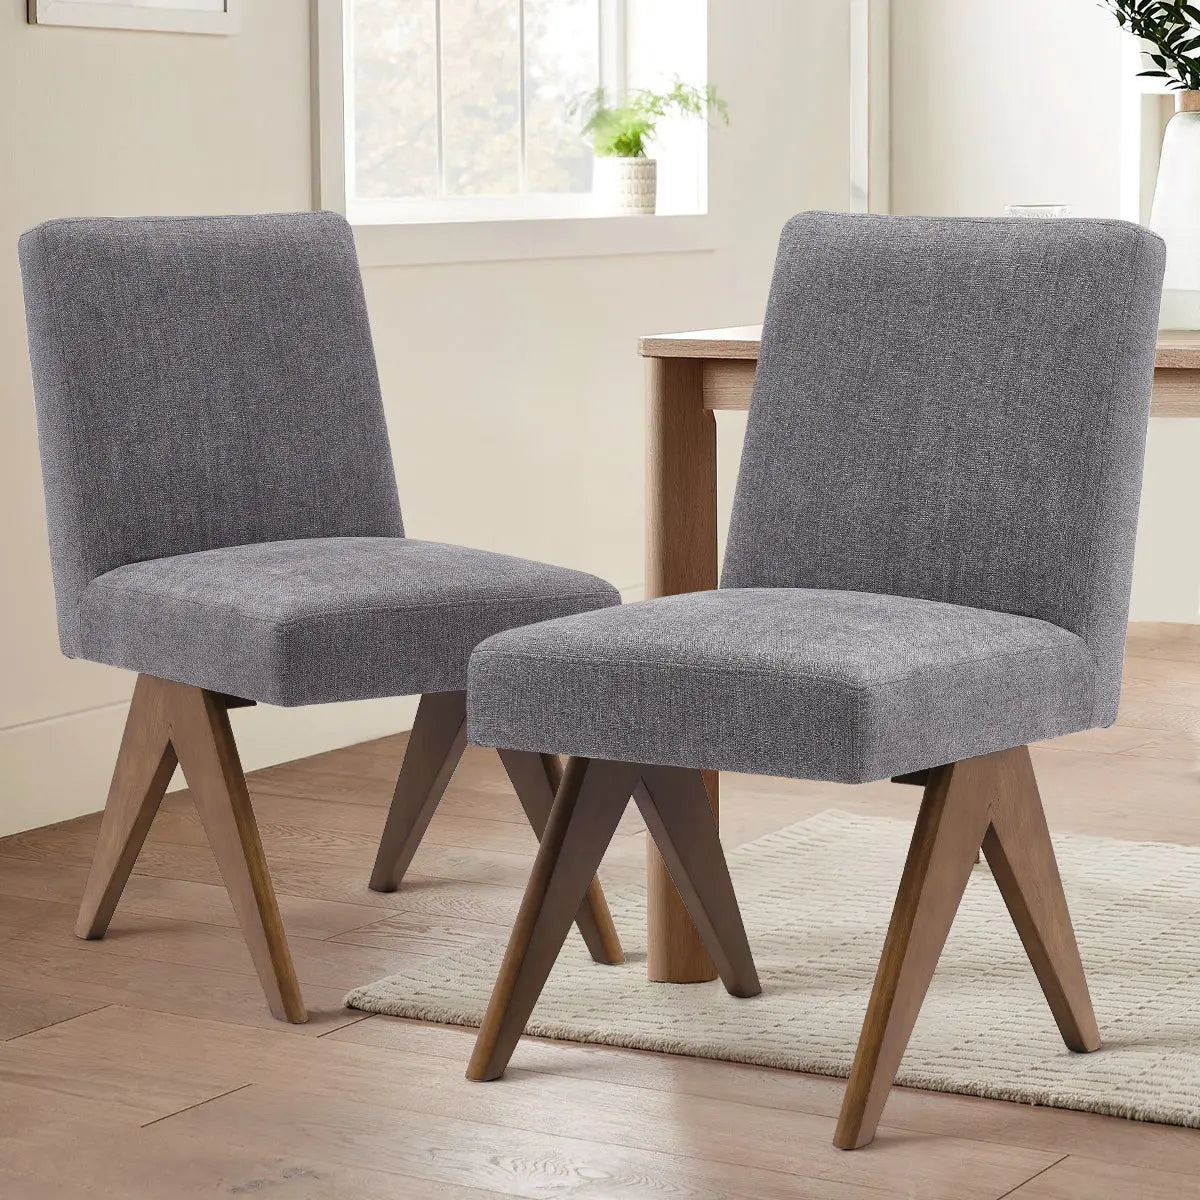 Morgan 18.5" Wide Upholstered Seat Dining Chair (Set of 2) The Pop Maison